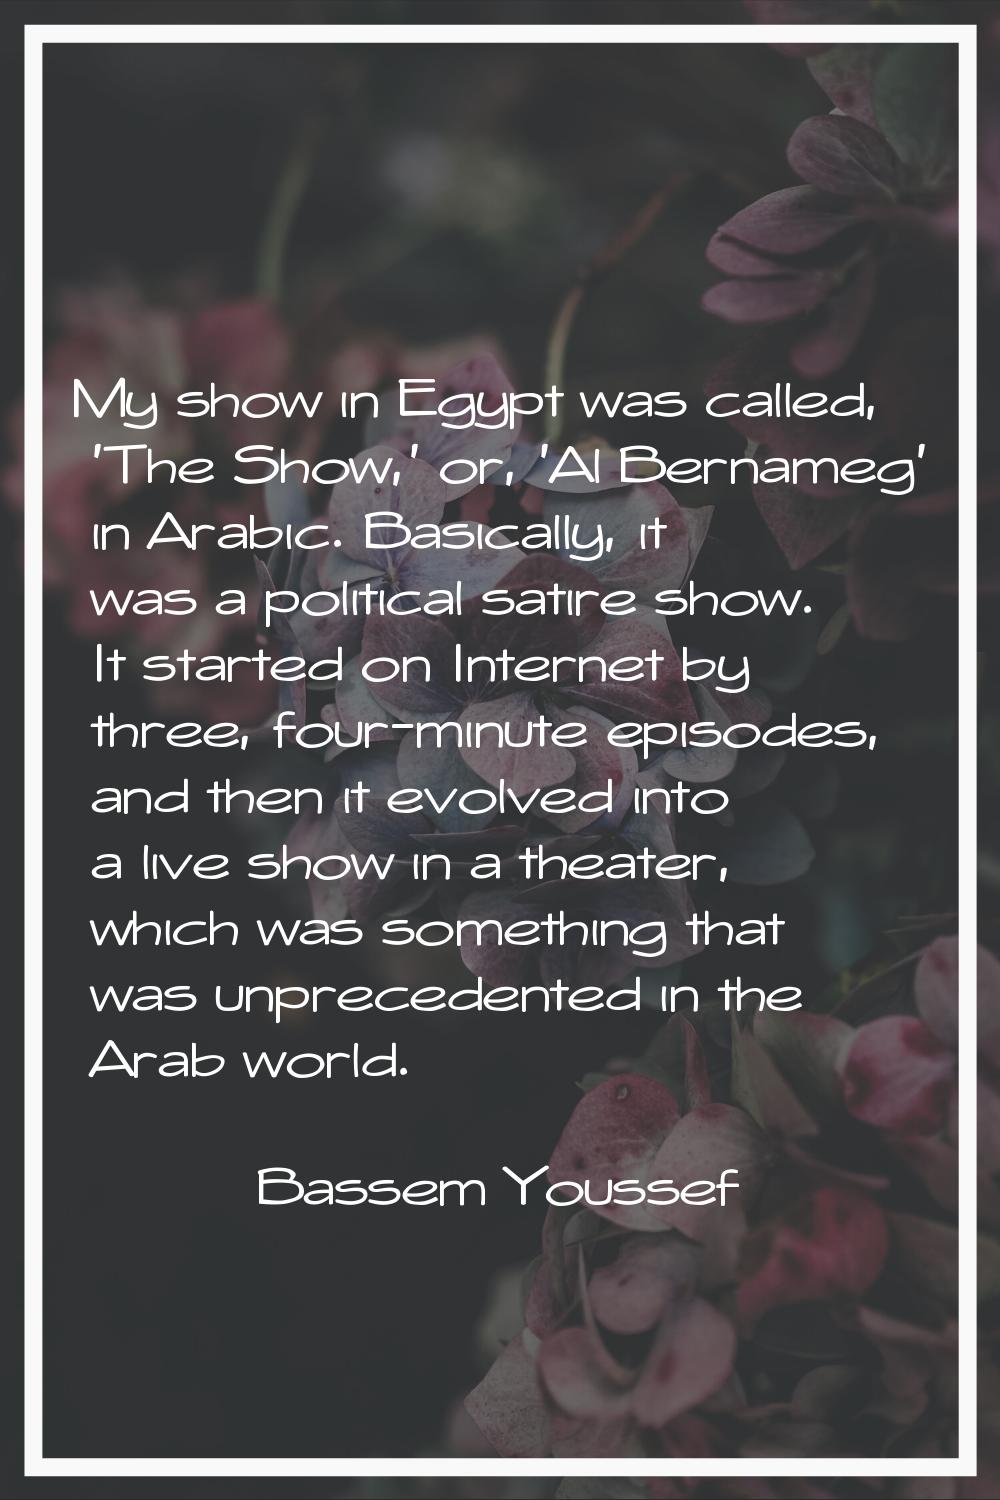 My show in Egypt was called, 'The Show,' or, 'Al Bernameg' in Arabic. Basically, it was a political